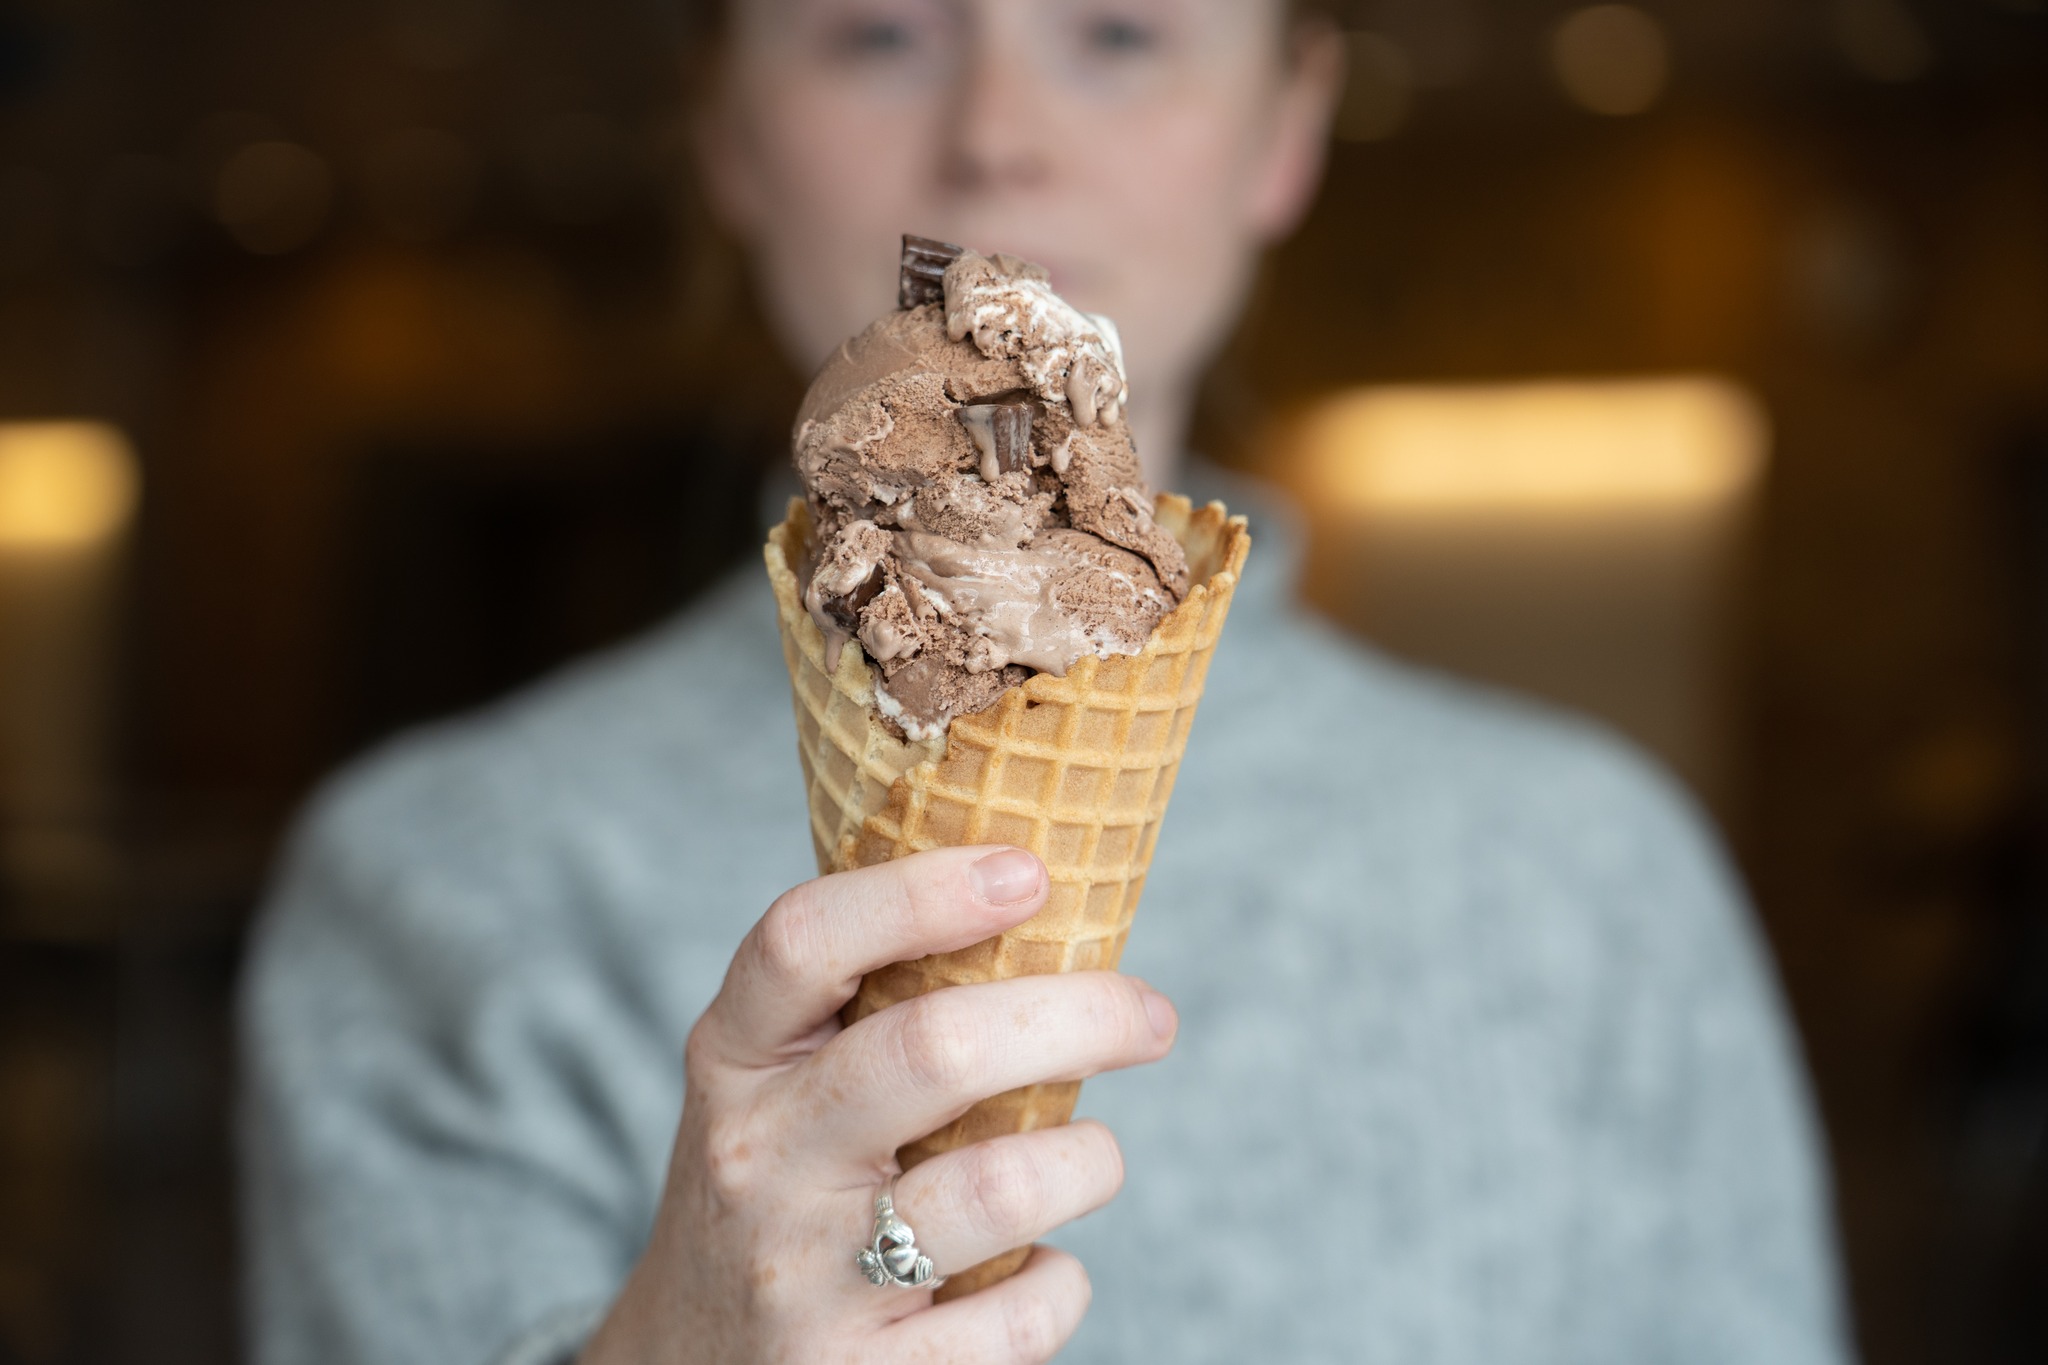 An ice cream cone held by a person who's visible in the background